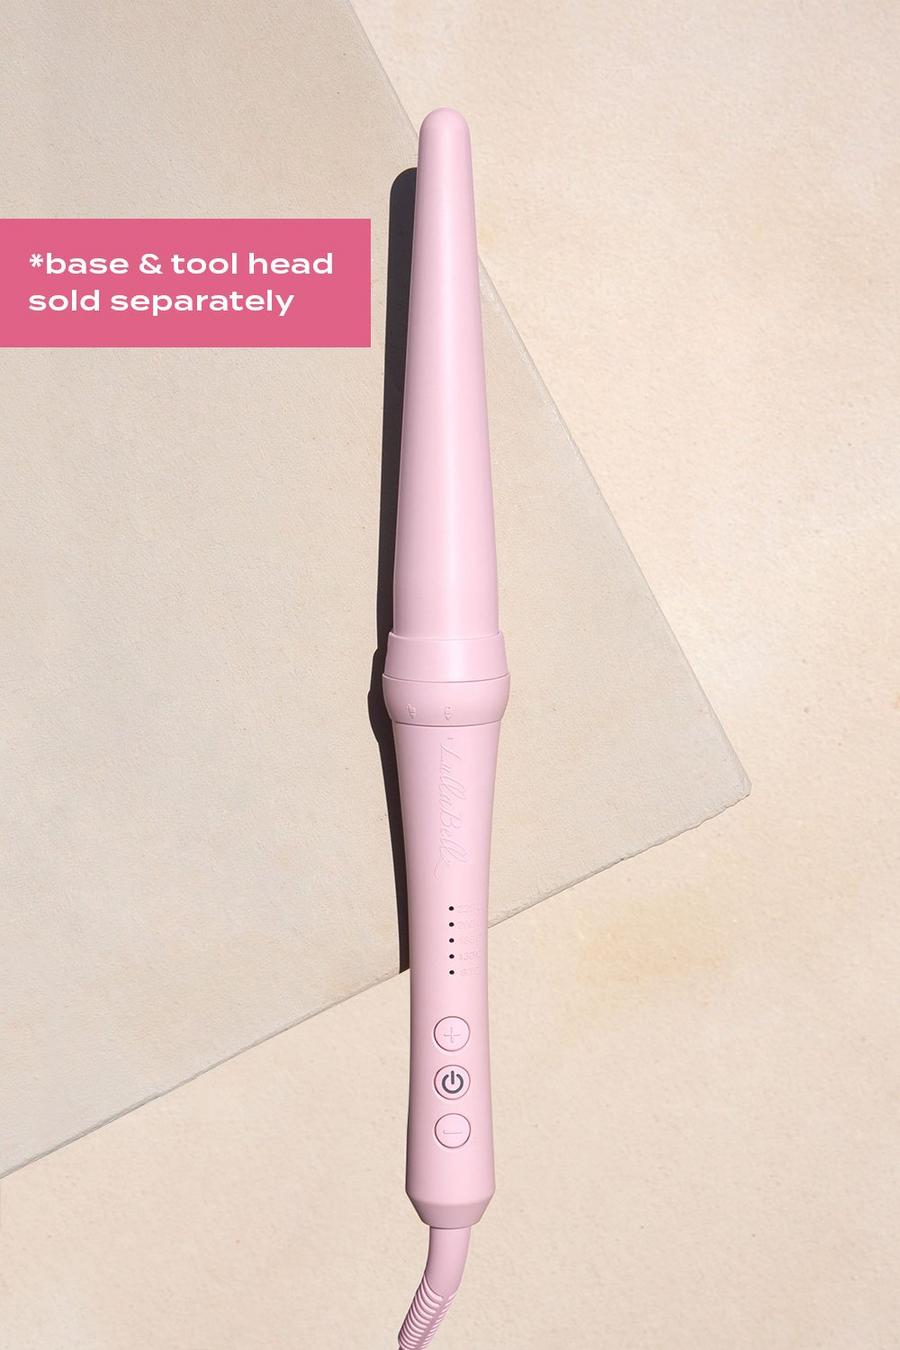 Lullabellz - Hair Tools - Level Up Curl Wand, Baby pink rosa